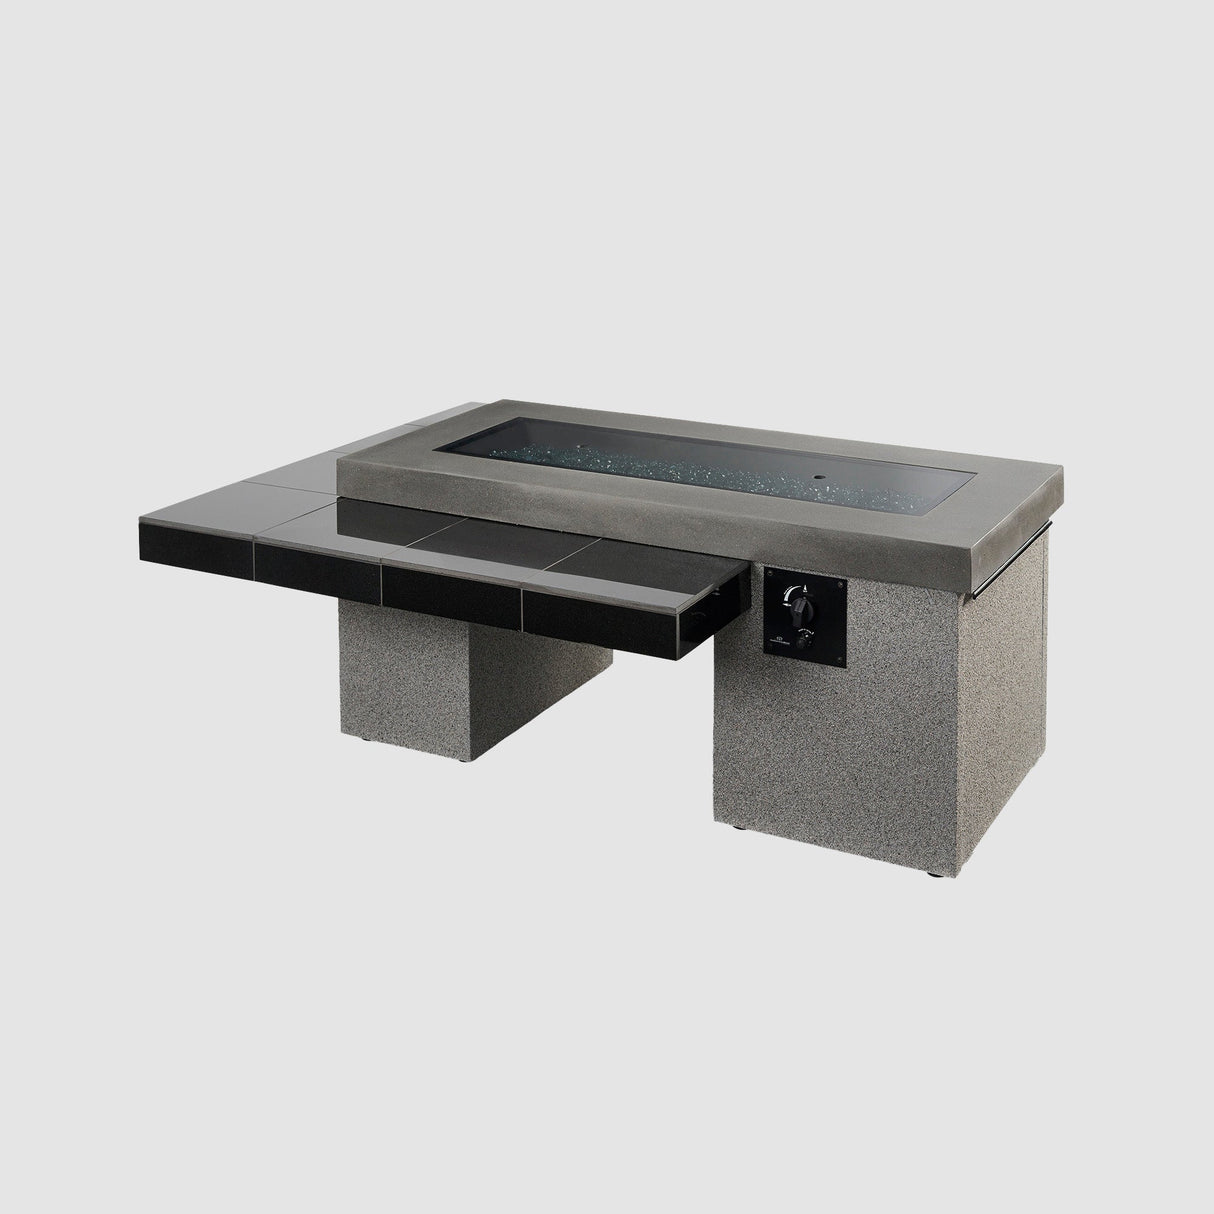 A cover placed on the top of a Black Uptown Linear Gas Fire Pit Table